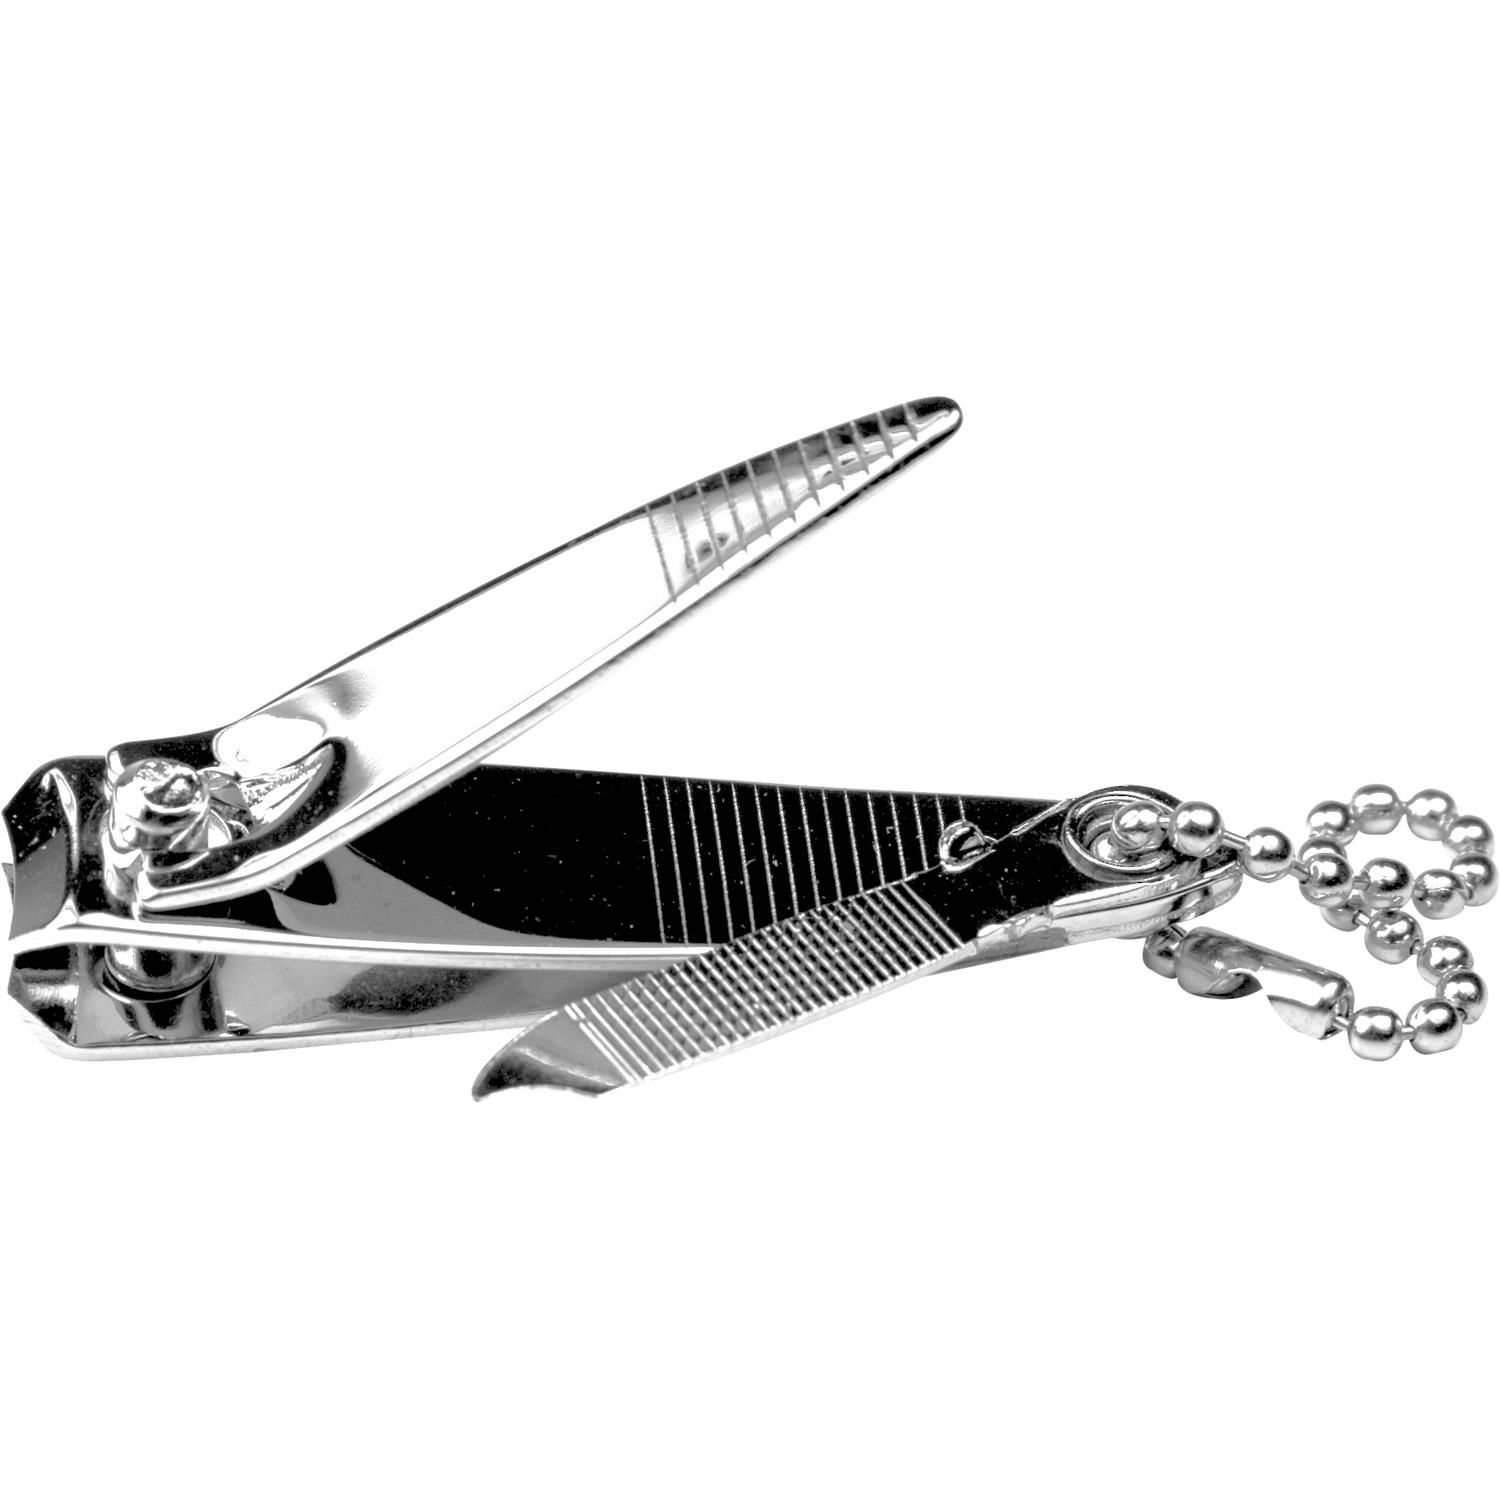 easy nail clippers